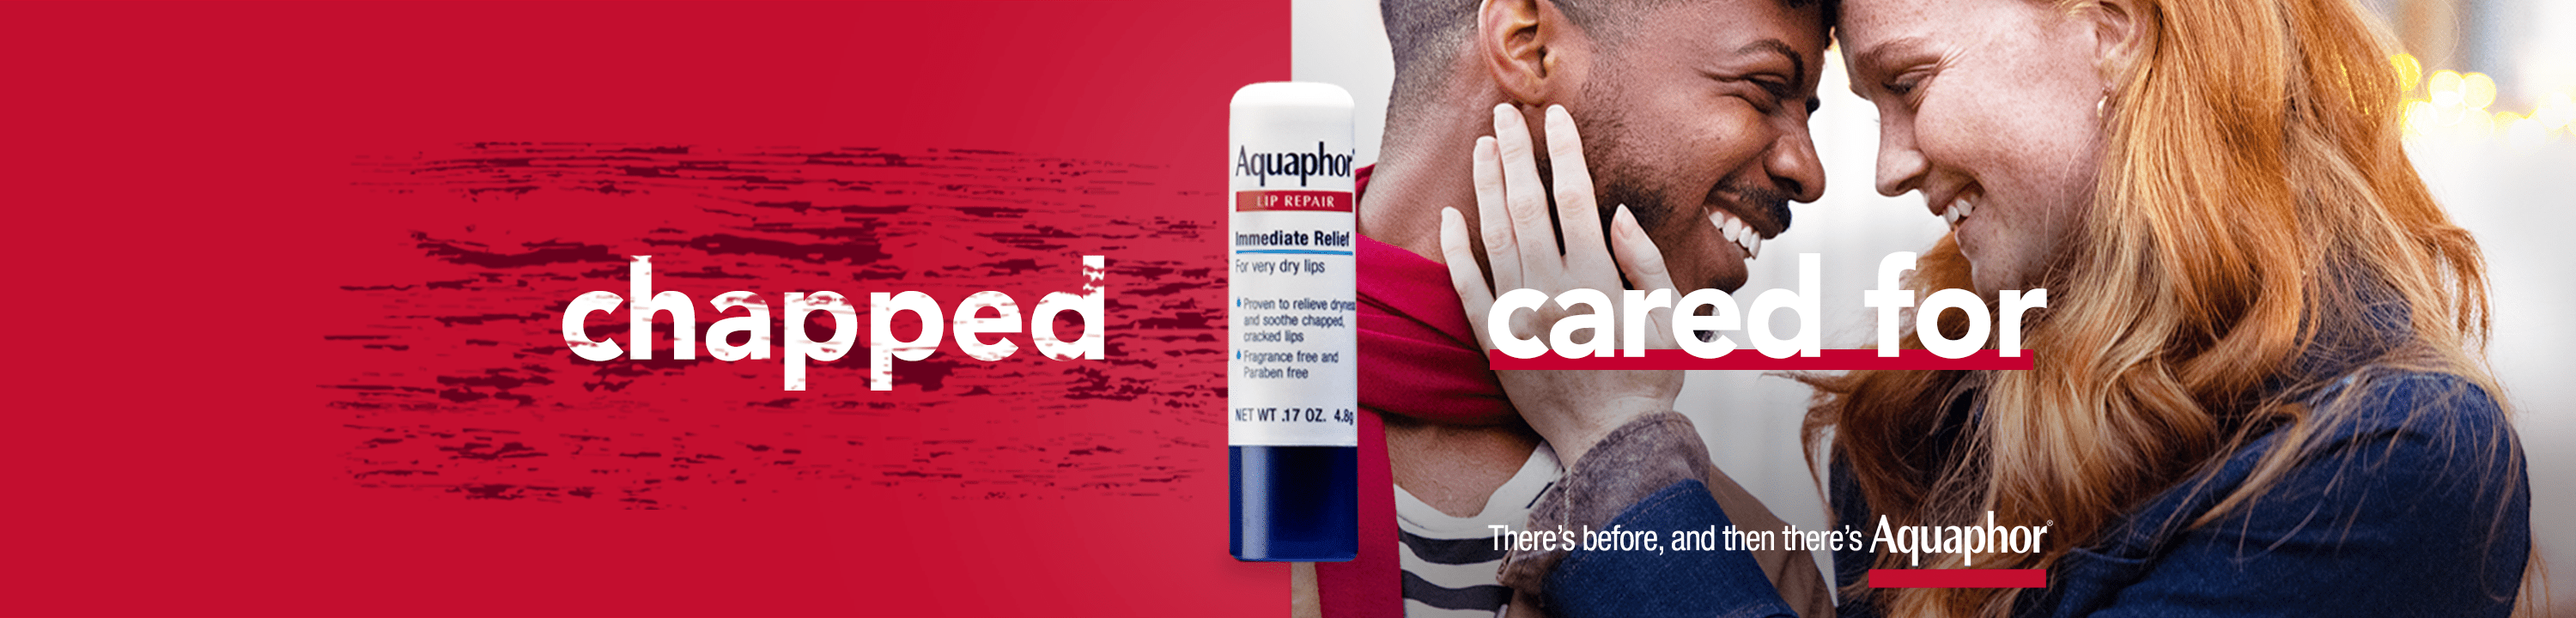 Before and Aquaphor - chapped to cared for